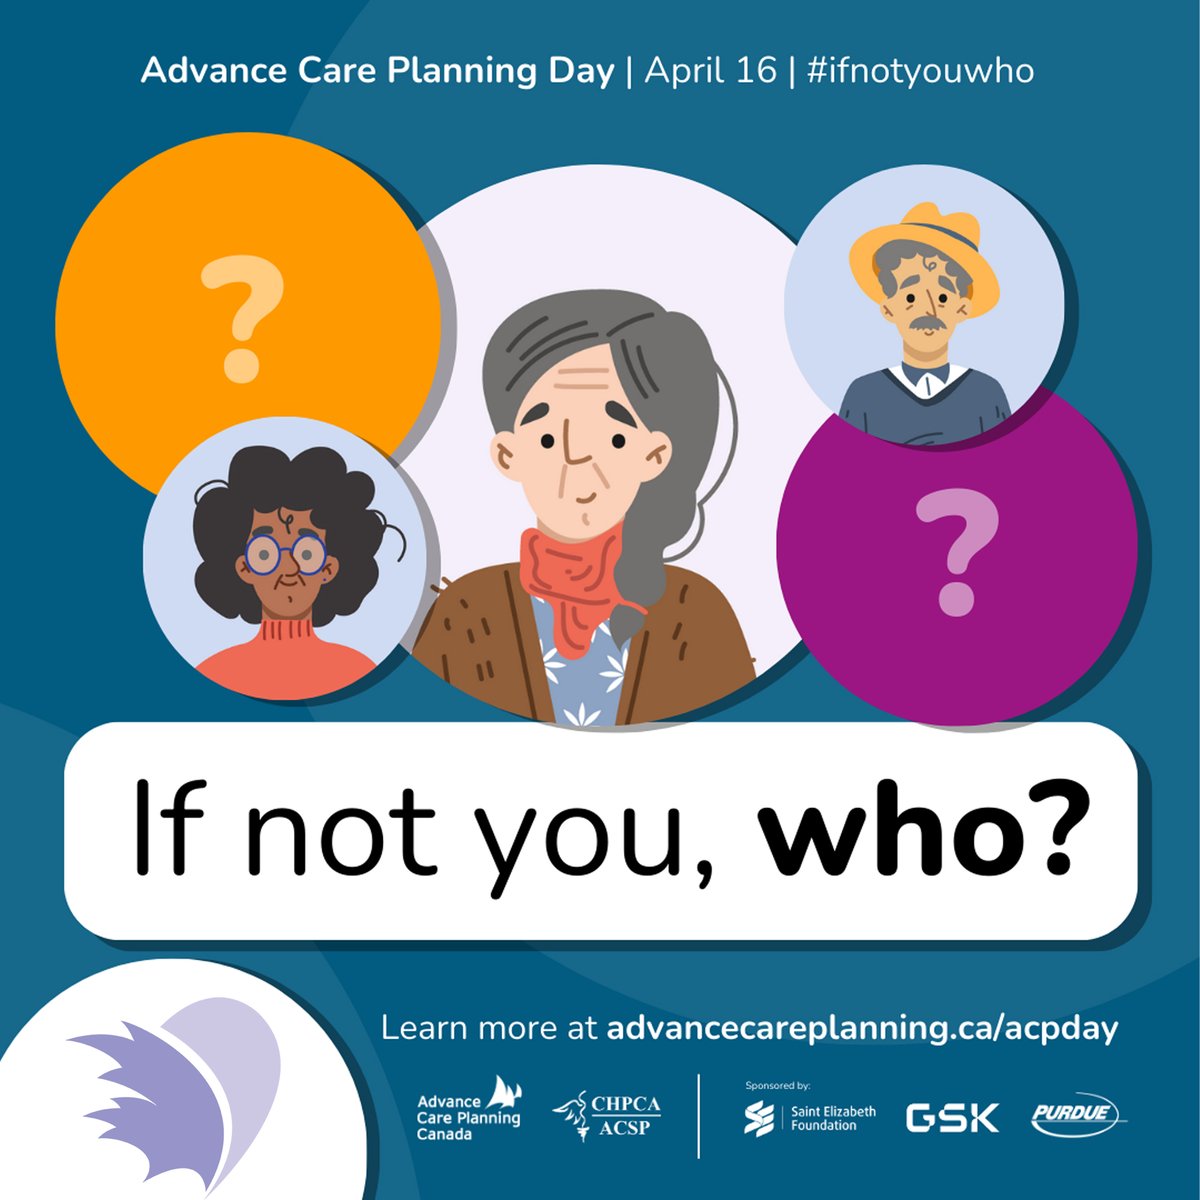 📅 Today is #AdvanceCarePlanningDay! 💬 Check out our webinar on advance care planning (ow.ly/FoLg50Rfpck) and explore the Summer-Fall 2022 issue of Connections magazine (ow.ly/ralr50Rfpca), where you'll find valuable resources to guide you through the process.